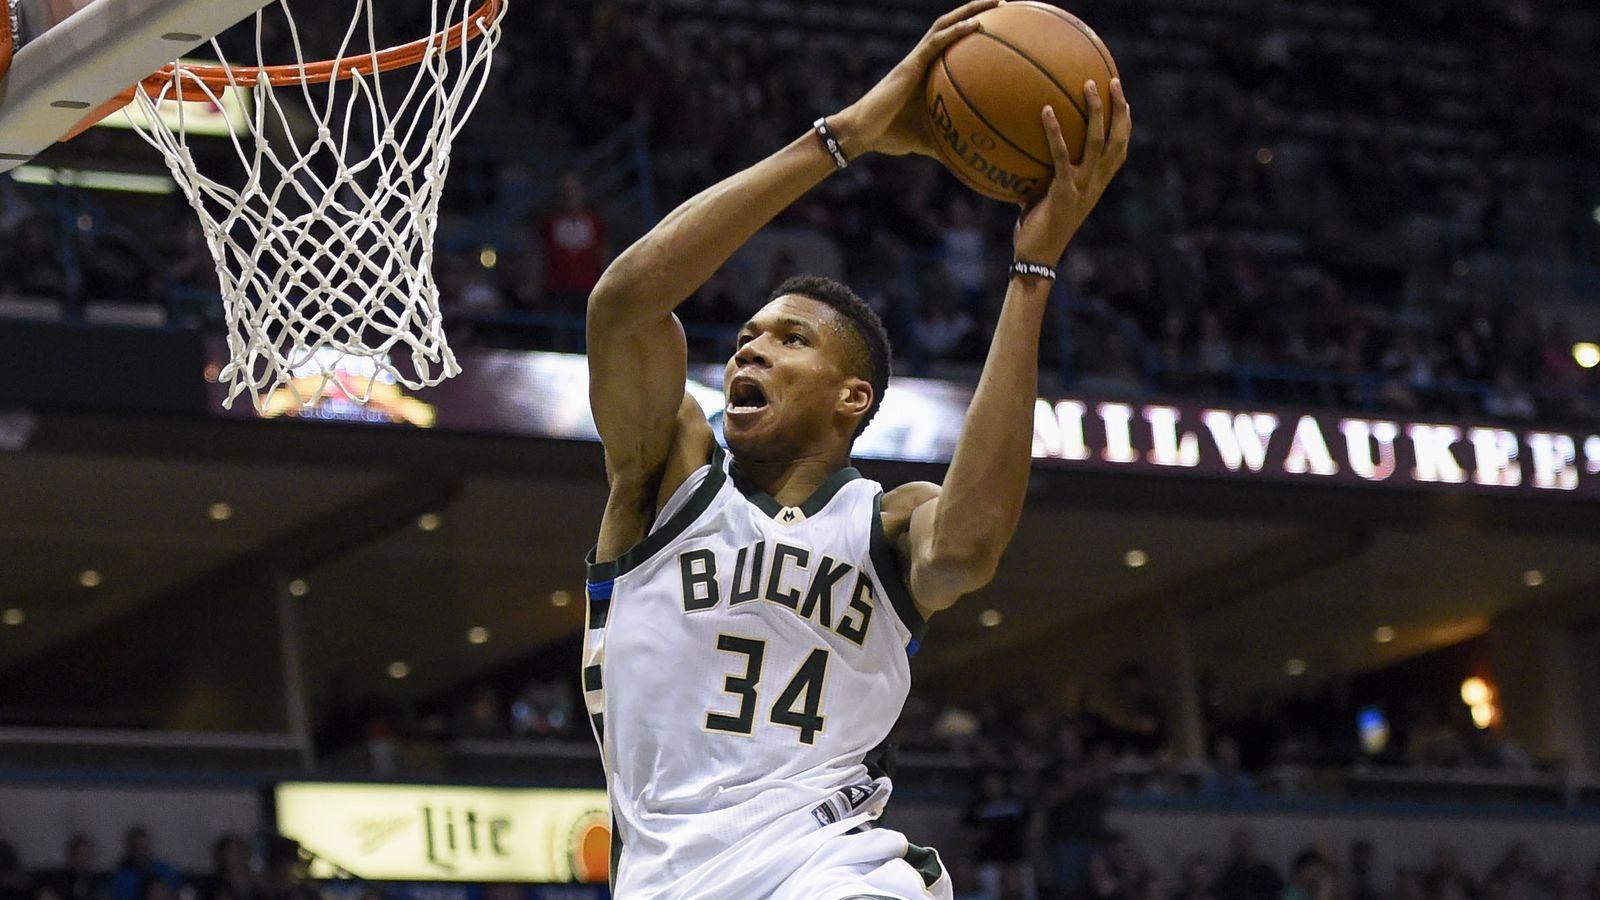 Cool Giannis Computer Wallpapers - Wallpaper Cave